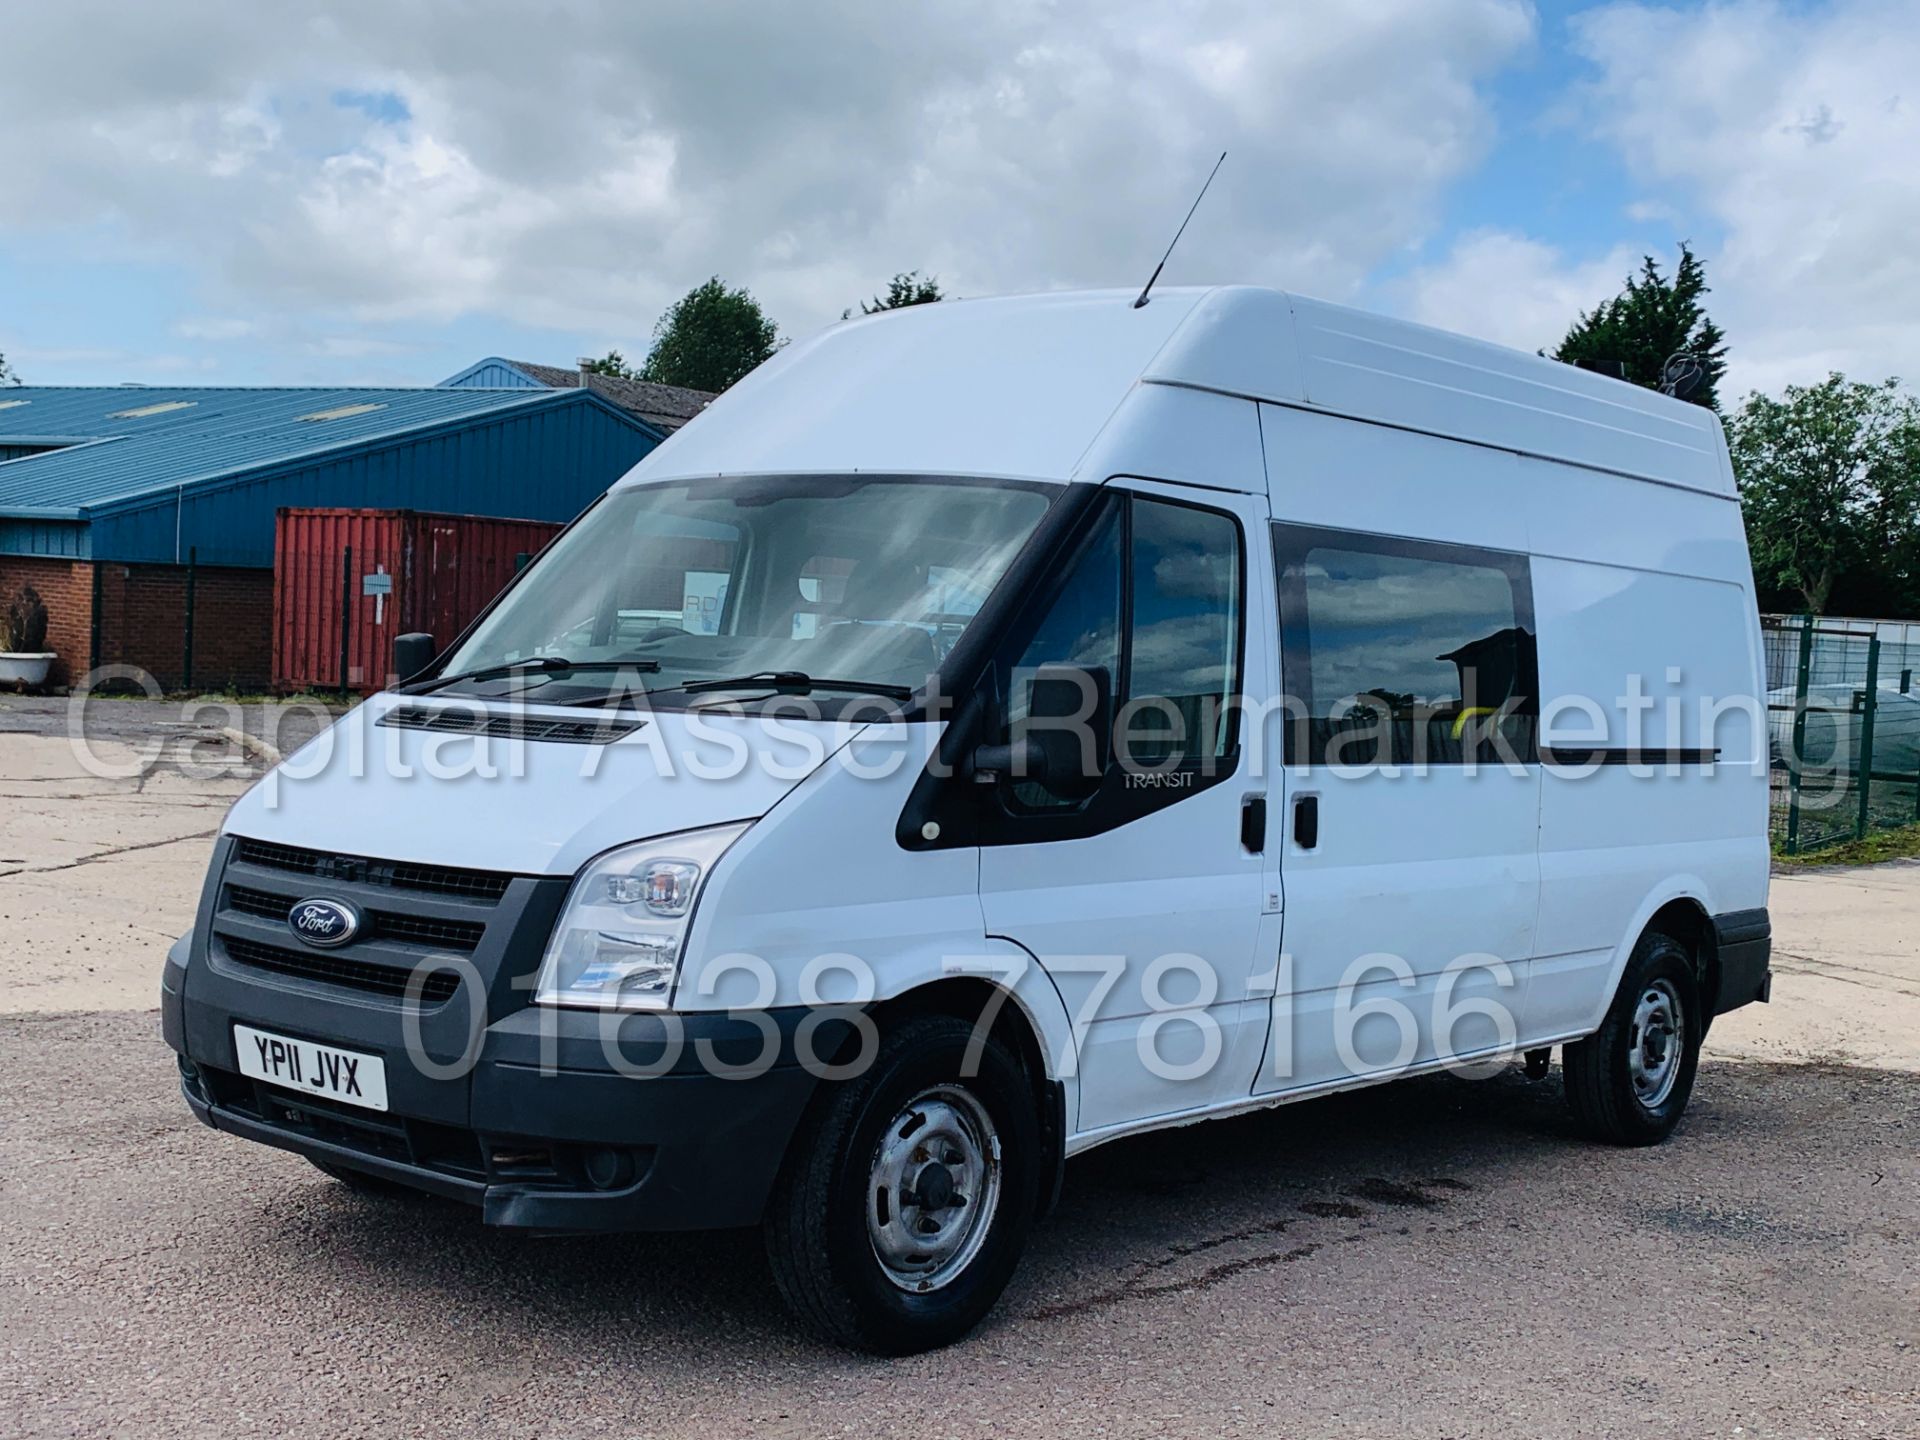 (On Sale) FORD TRANSIT T350L *CLARKS CONVERSION - LWB MESSING UNIT* (2011) '2.4 TDCI' (1 OWNER) - Image 3 of 41